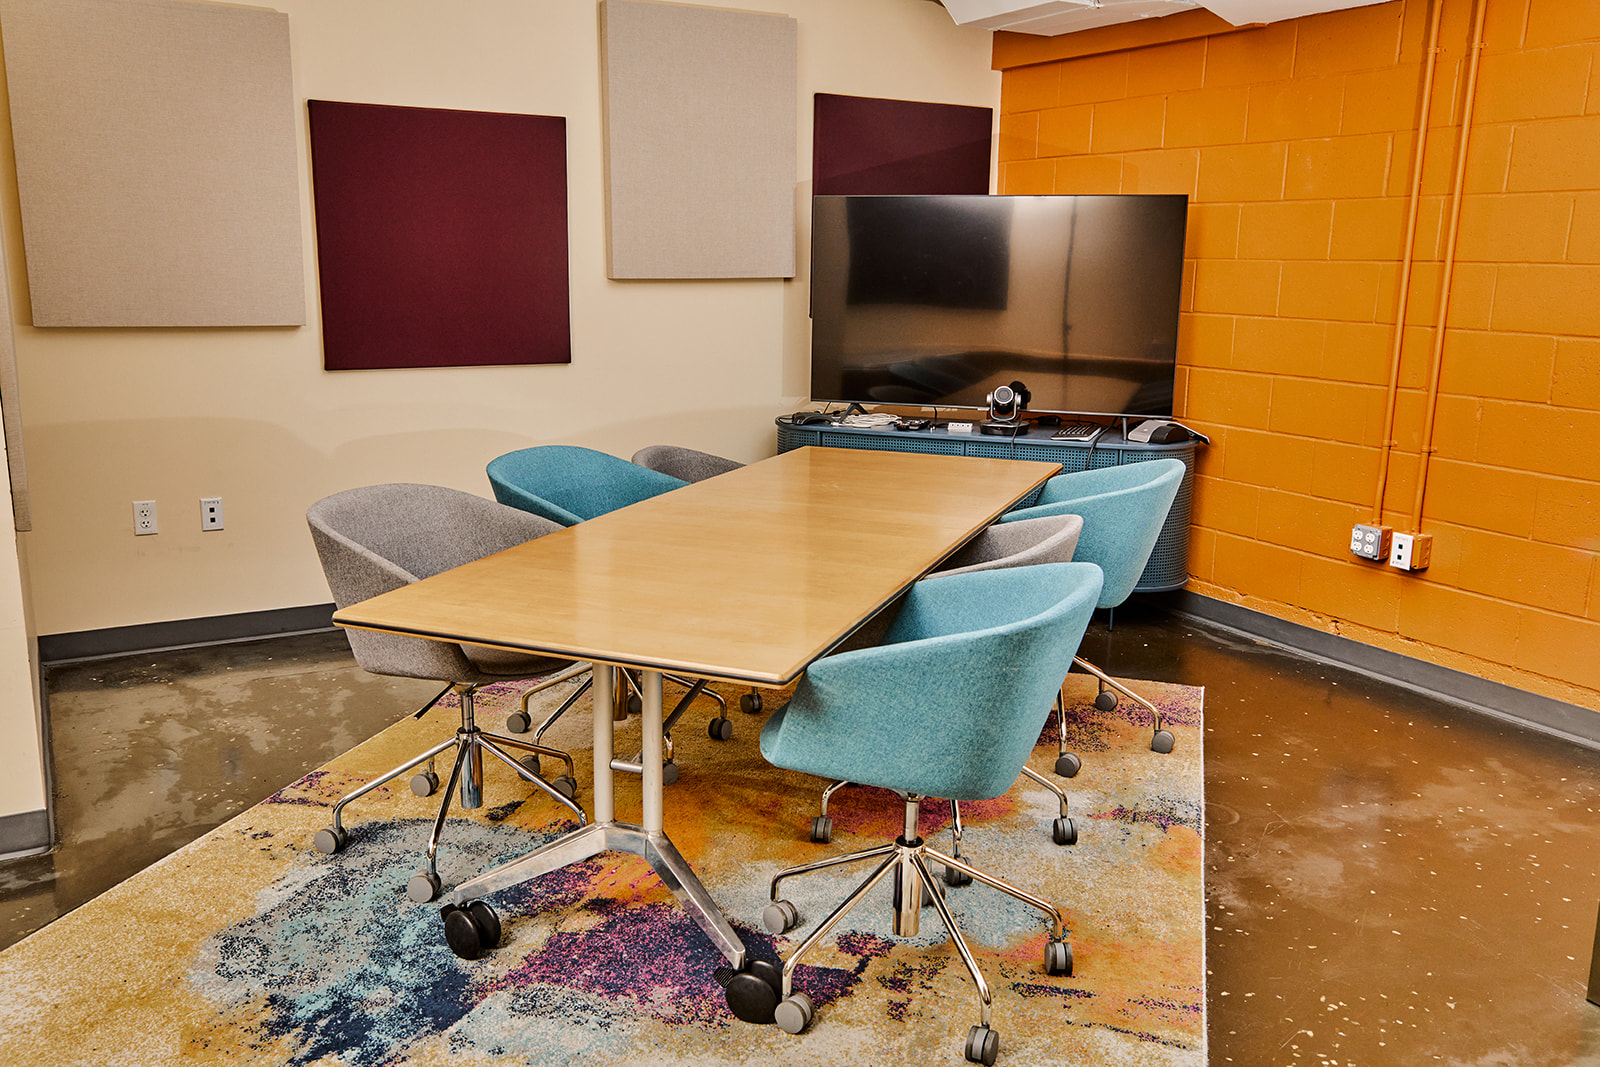 Conference room with large TV screen/monitor and table with six chairs